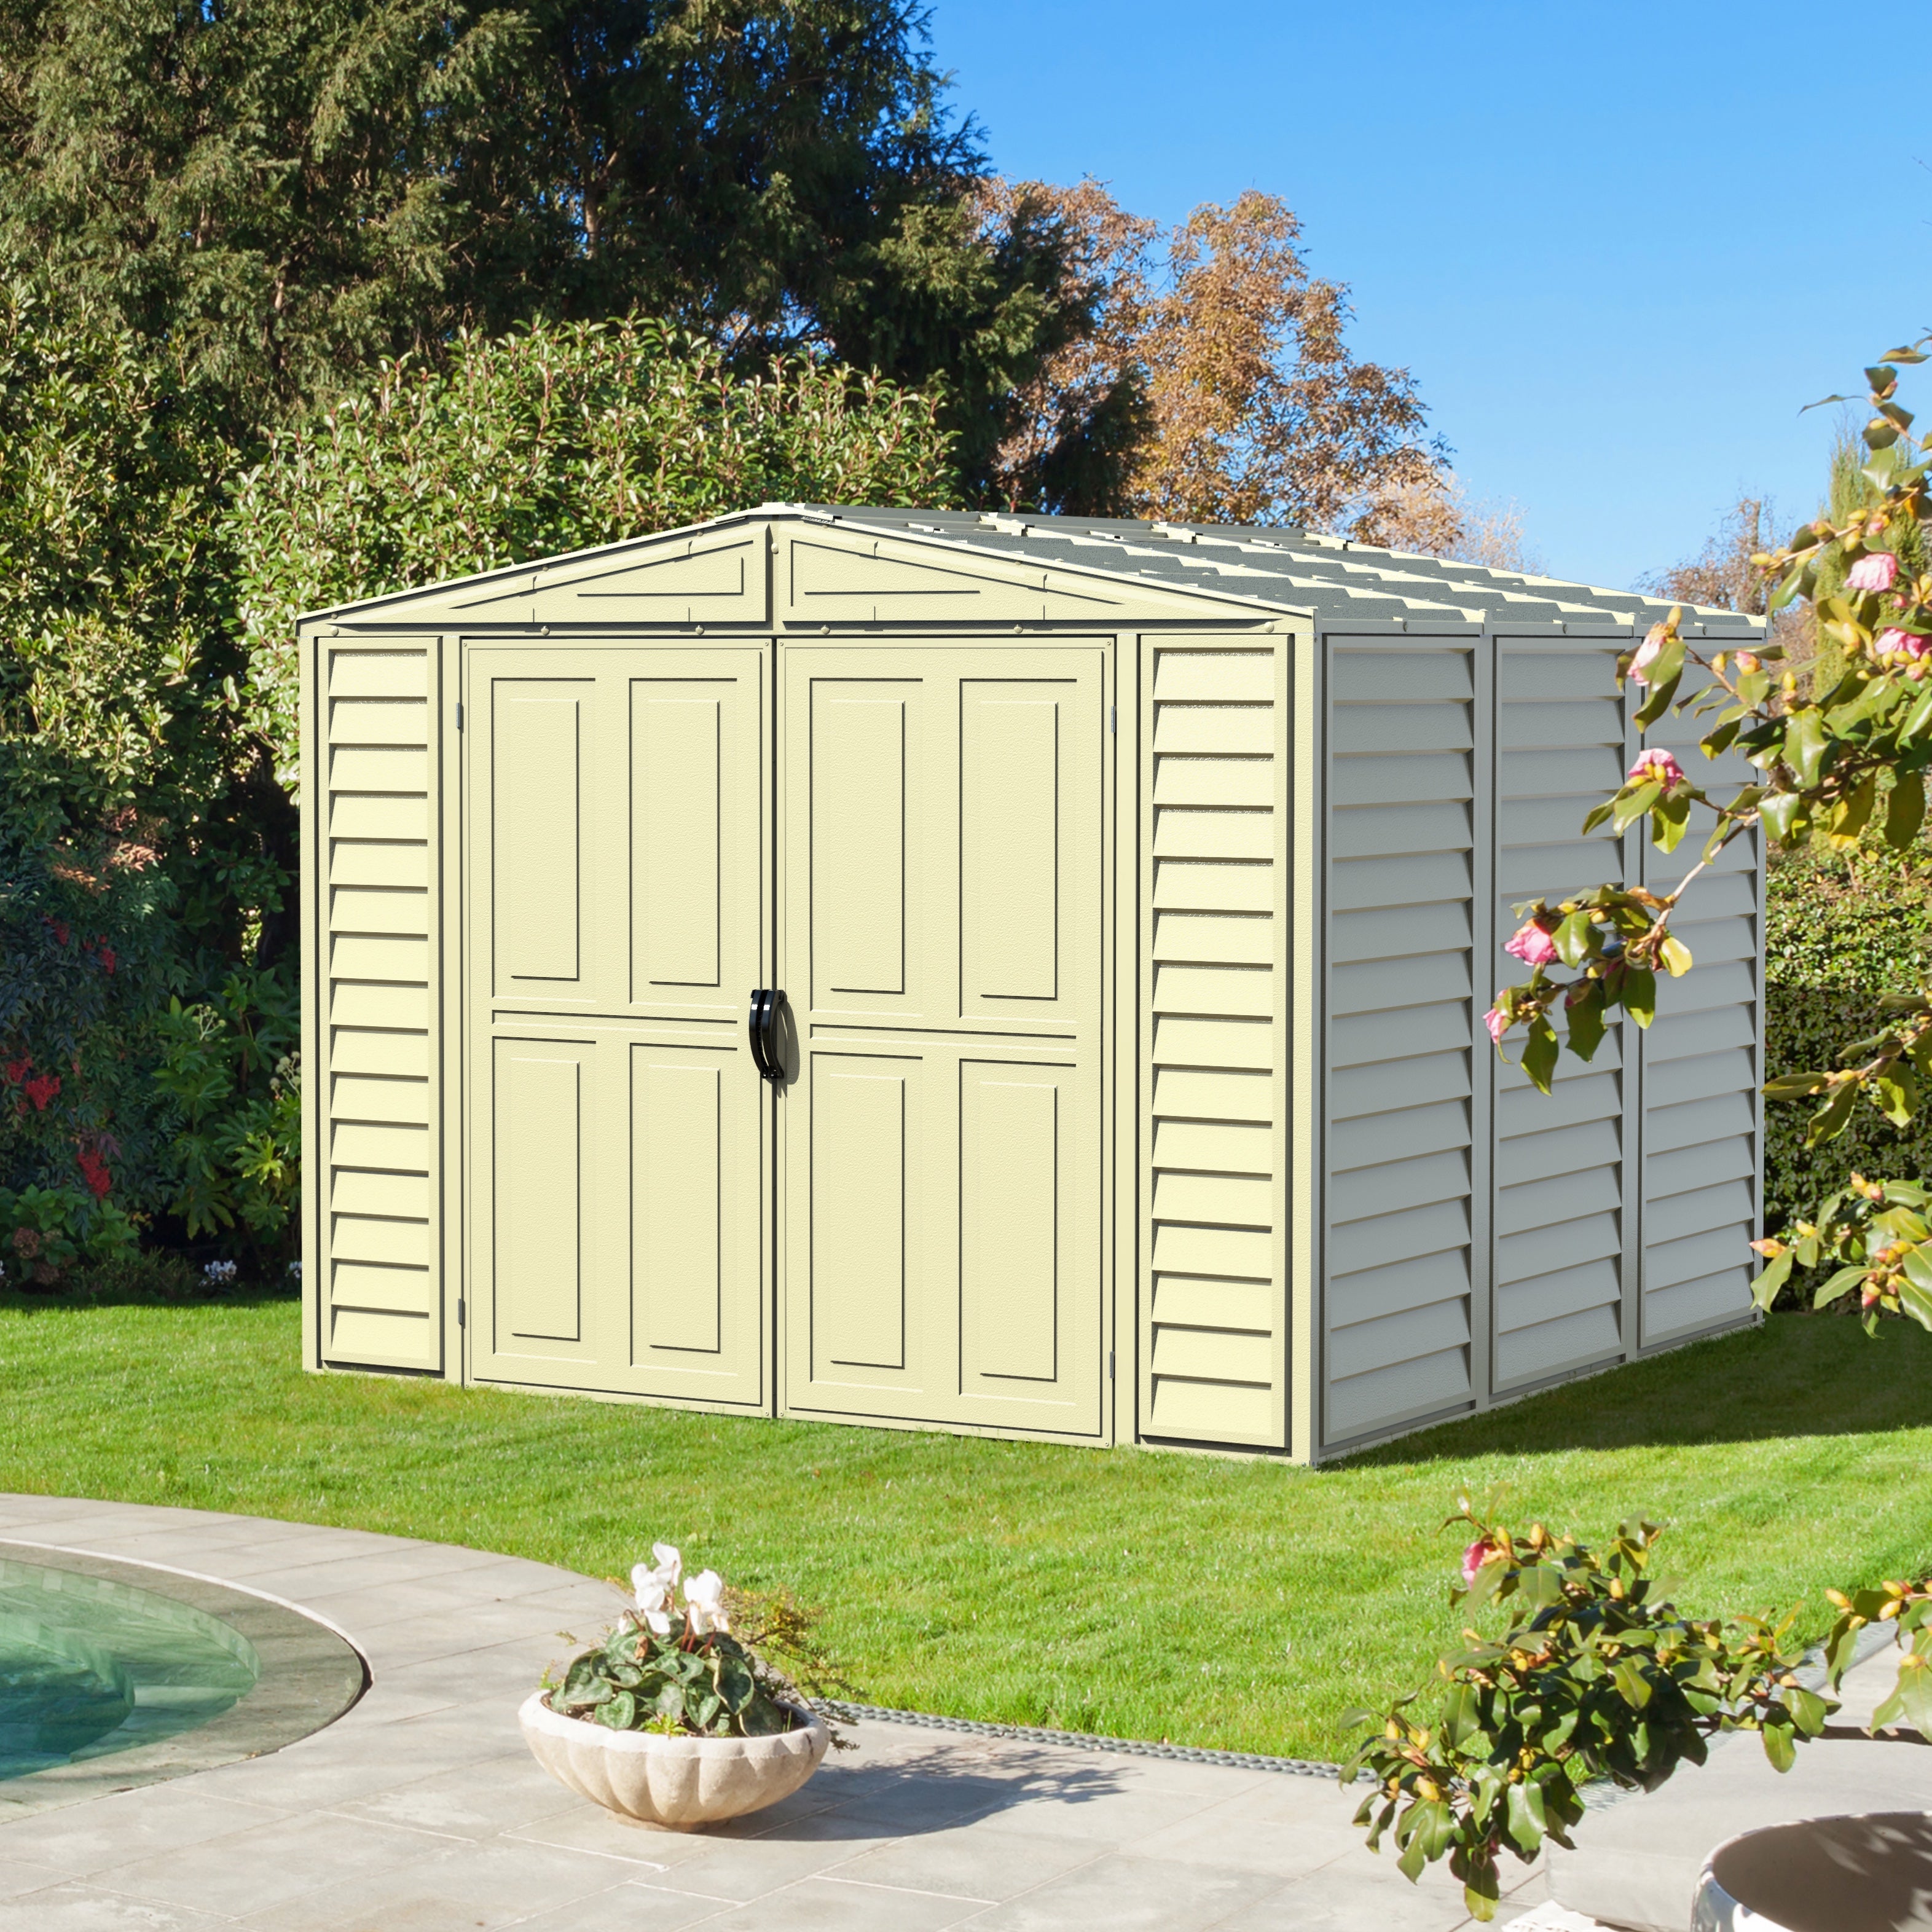 Duramax 8ft x 8ft Duramate Vinyl Shed with Foundation Kit